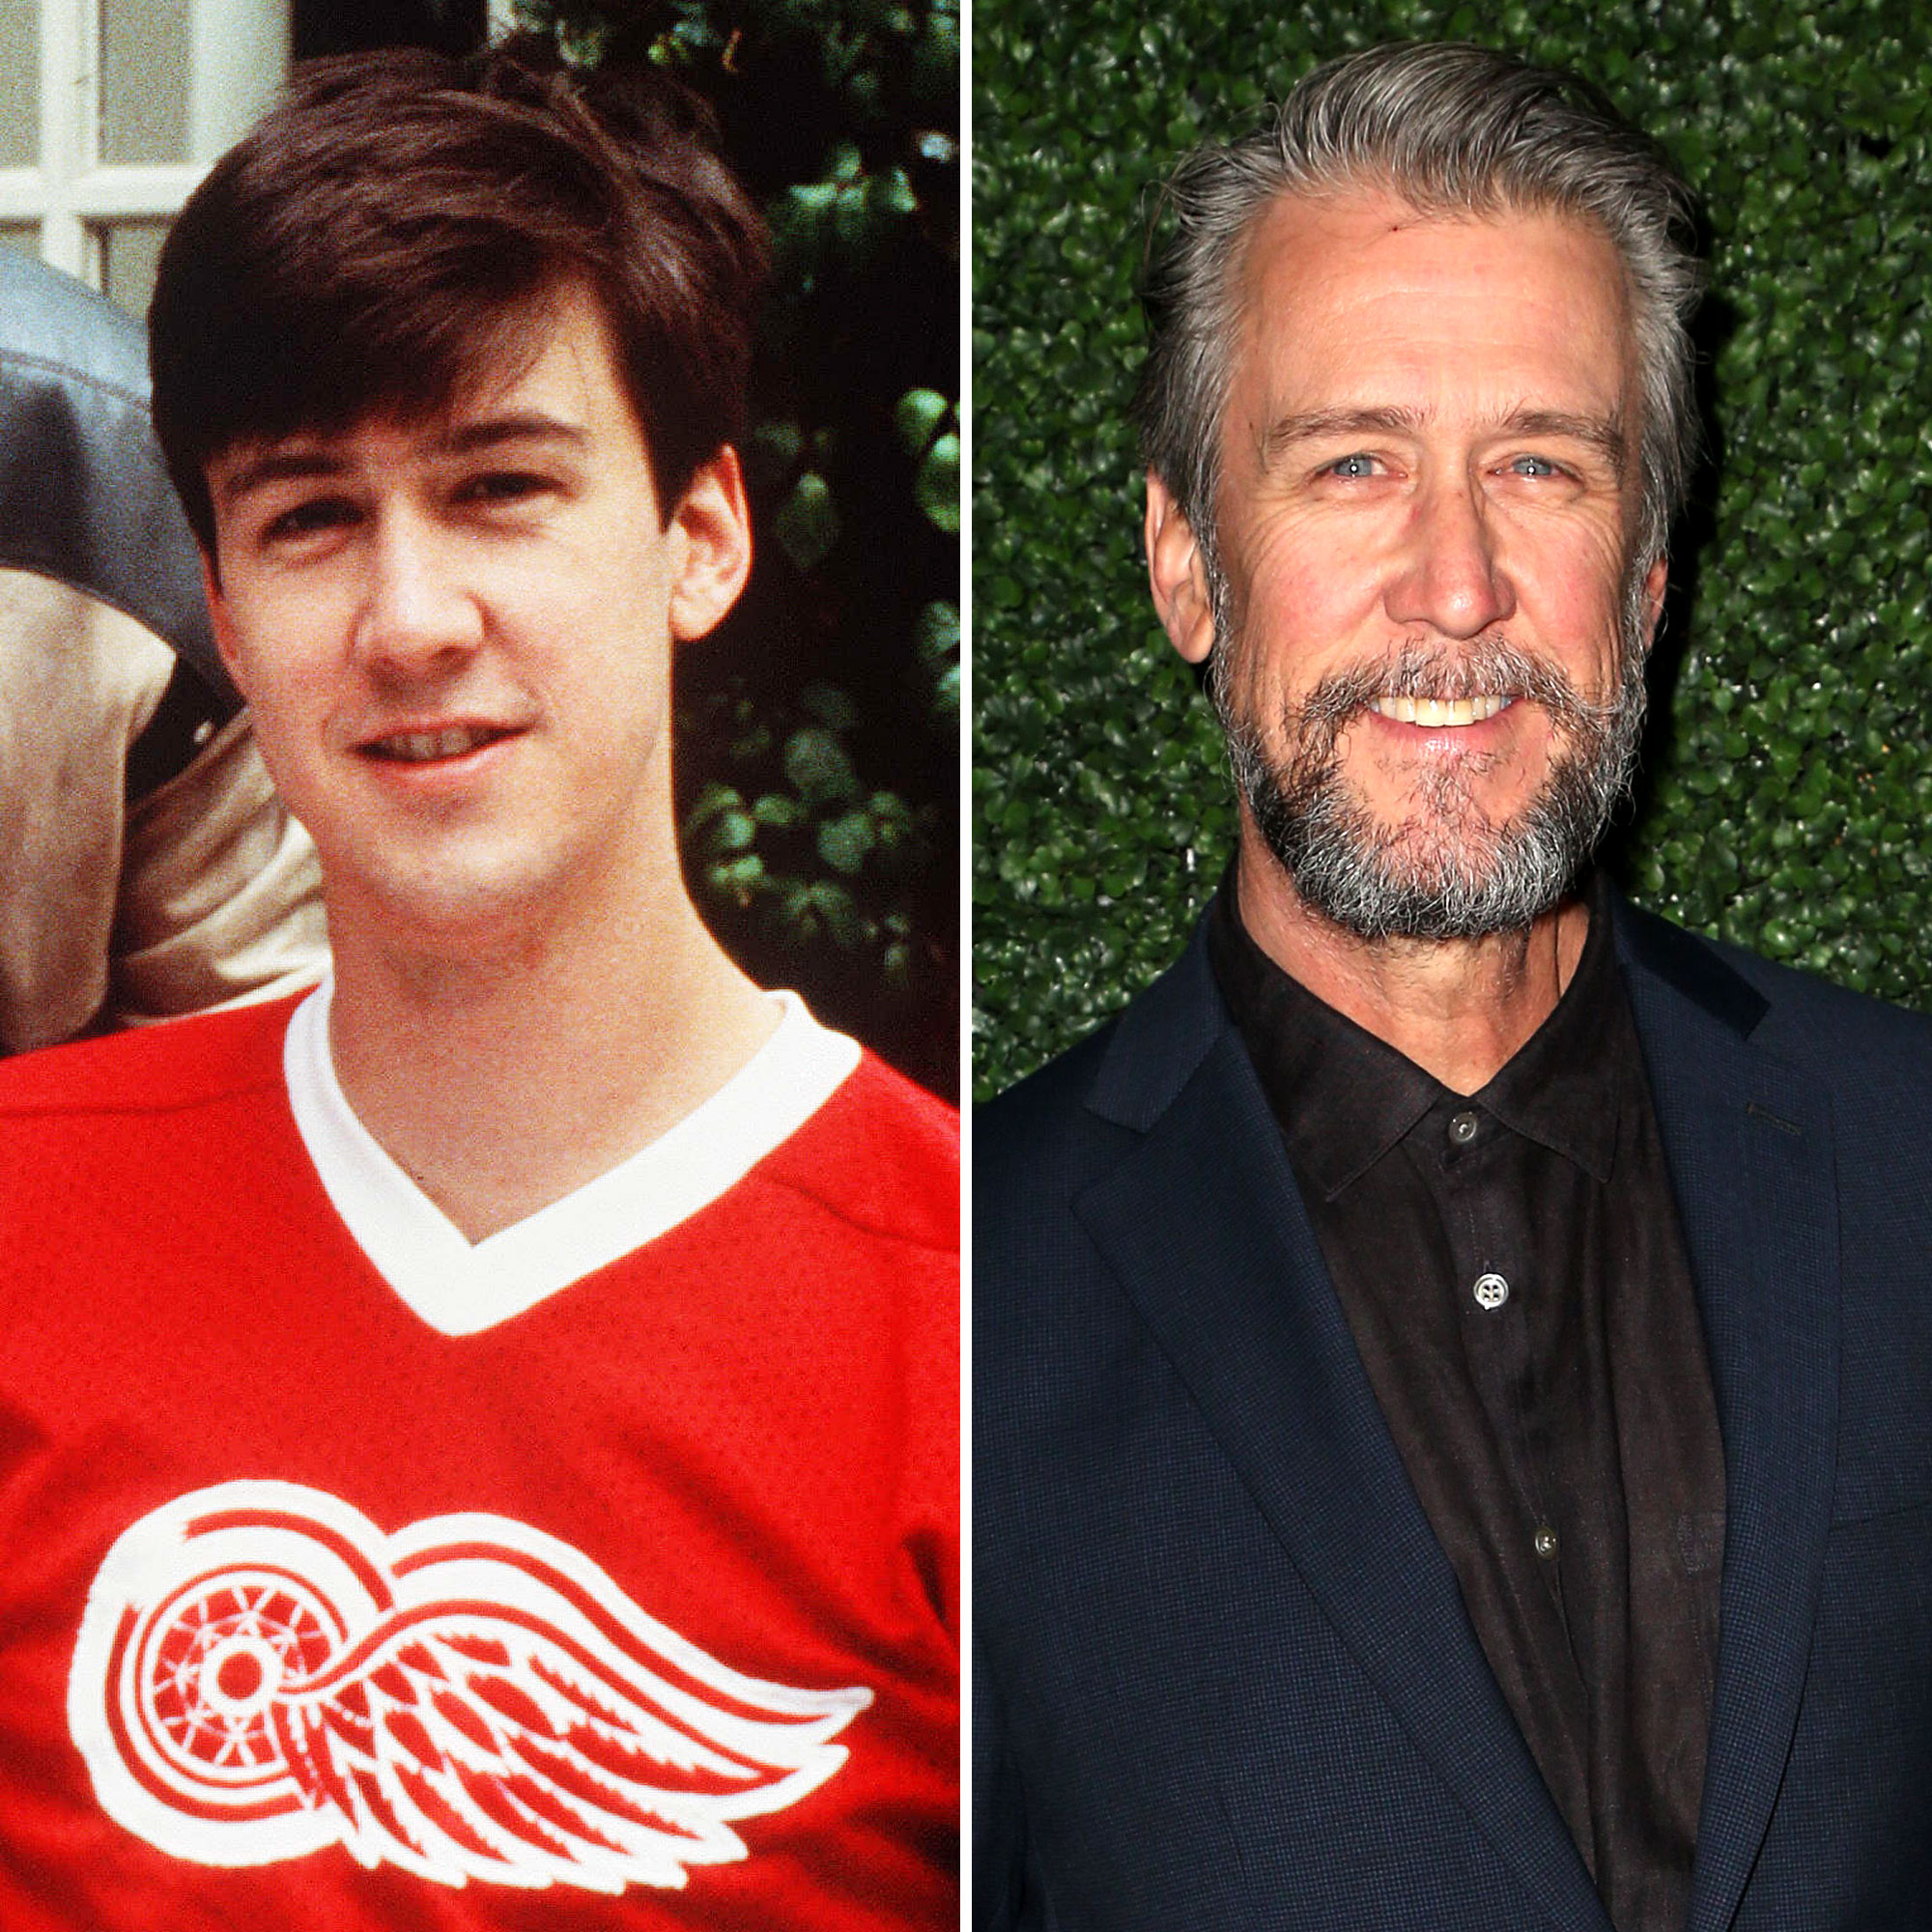 Whatever Happened To Cameron From Ferris Bueller's Day Off?